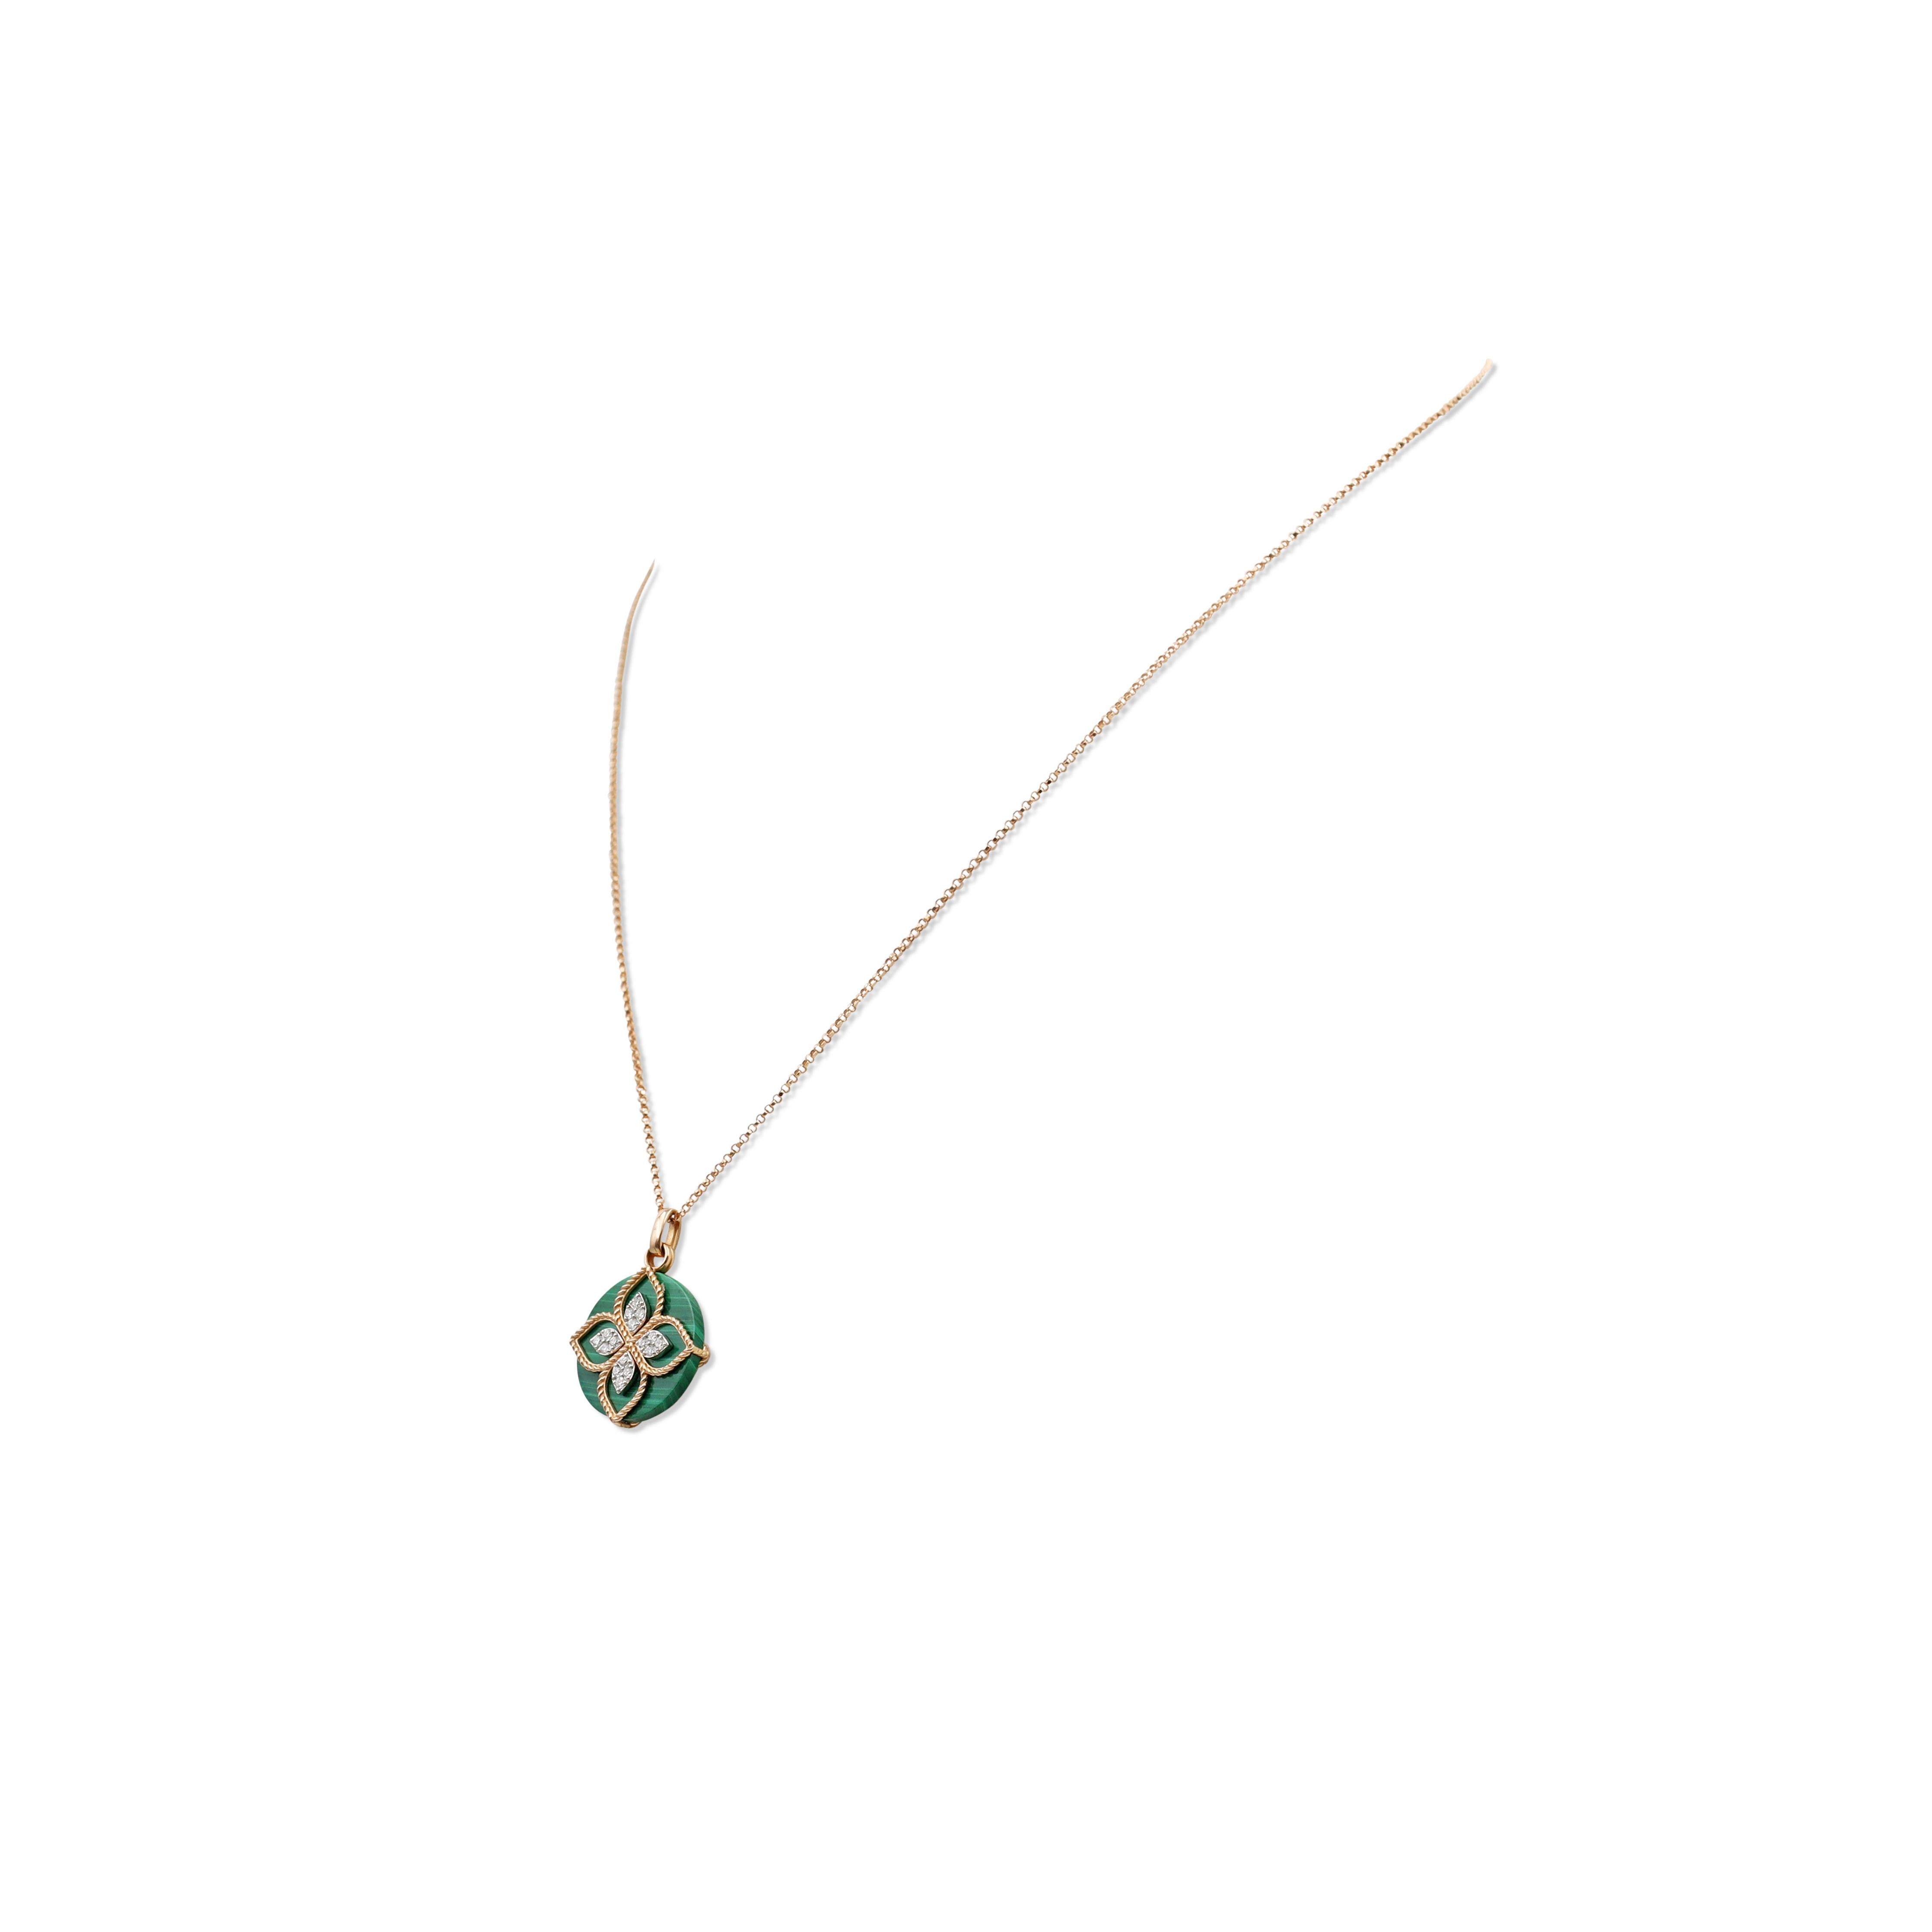 Authentic Roberto Coin pendant necklace crafted in 18 karat yellow gold and malachite.  Designed as a simplified lotus flower with petals made of chiseled golden thread, delicately placed on a malachite disk. The lotus is set with round brilliant